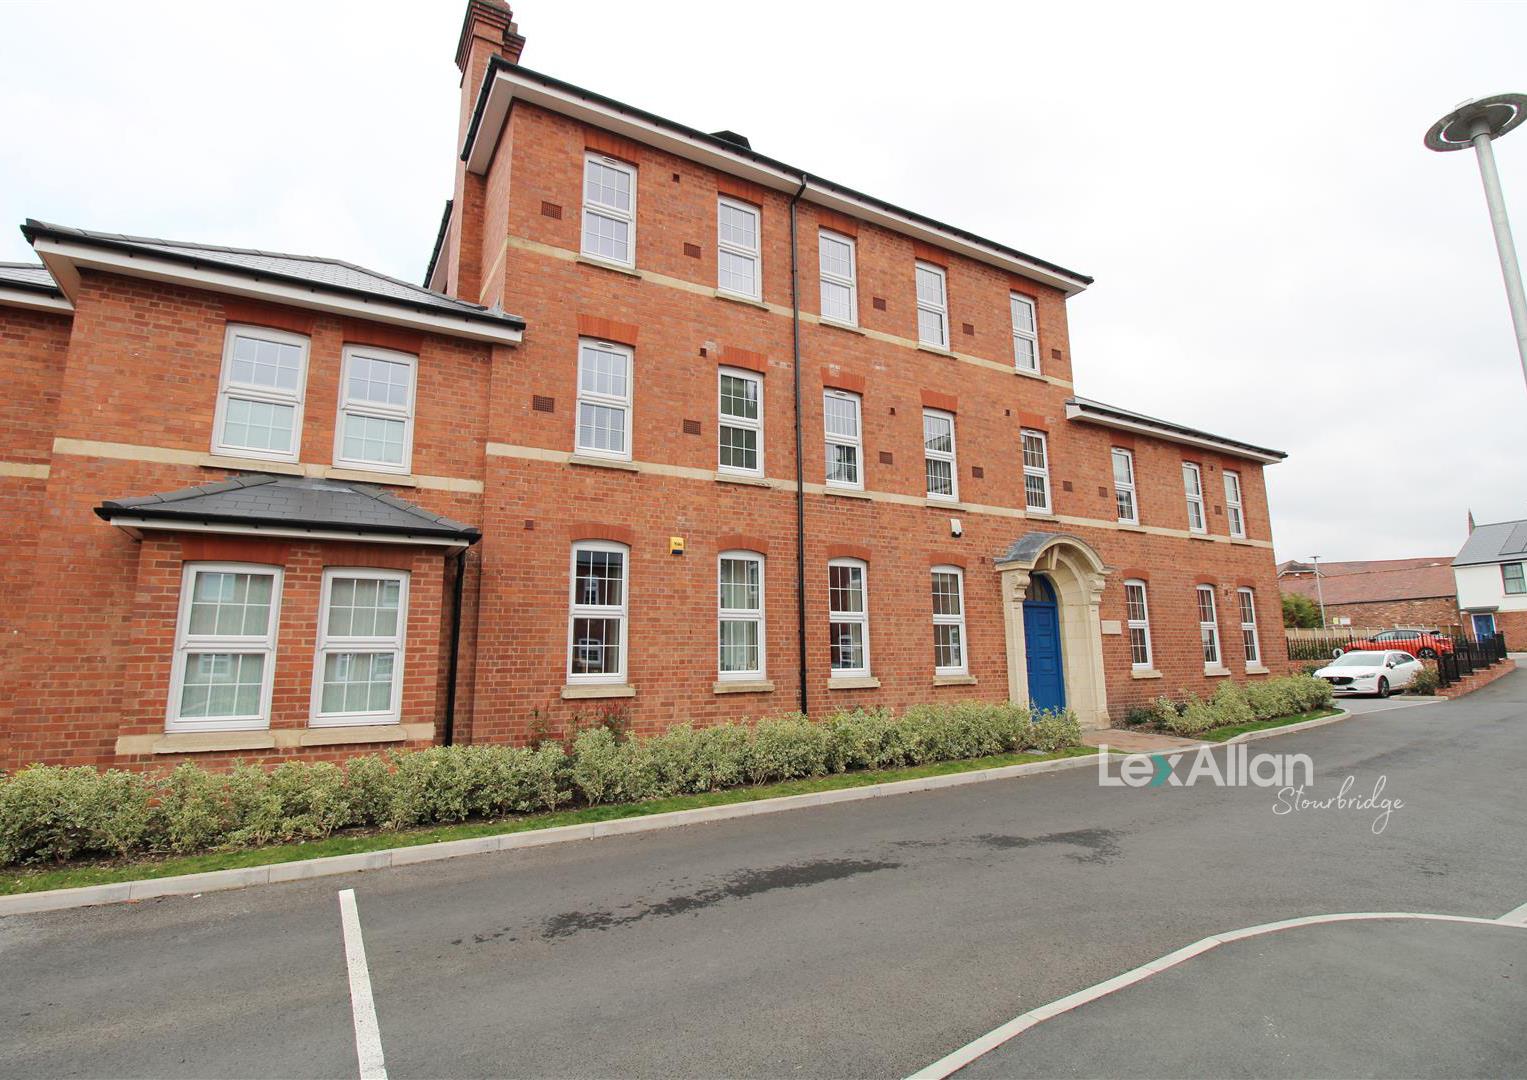 1 bed  for sale in Victoria Street, Stourbridge, DY8 